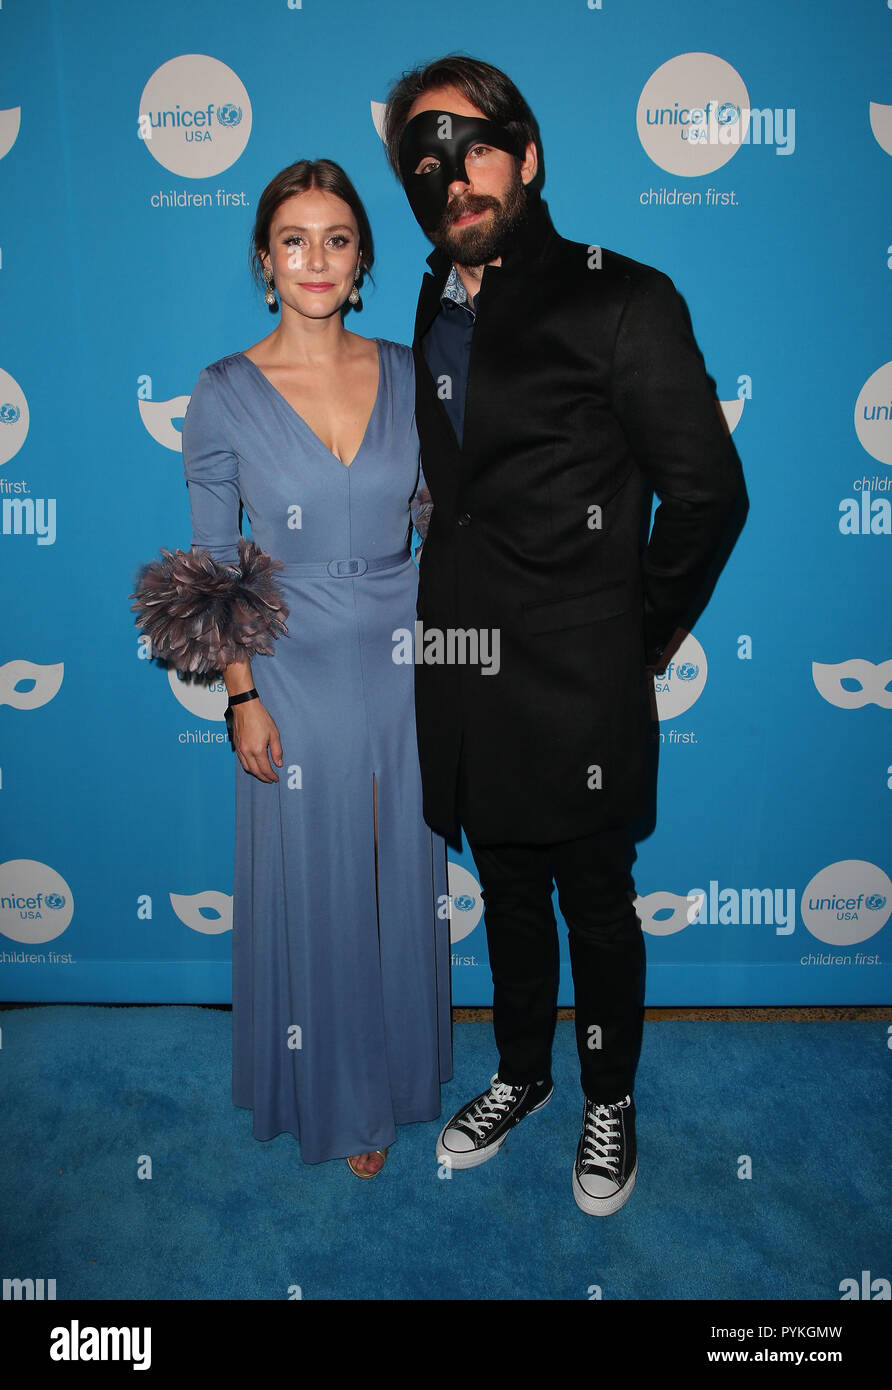 Los Angeles, California, USA. 25th Oct, 2018. Julianna Guill, Martin Starr during arrivals for the 6th Annual UNICEF Masquerade Ball. Credit: Faye Sadou/AdMedia/ZUMA Wire/Alamy Live News Stock Photo